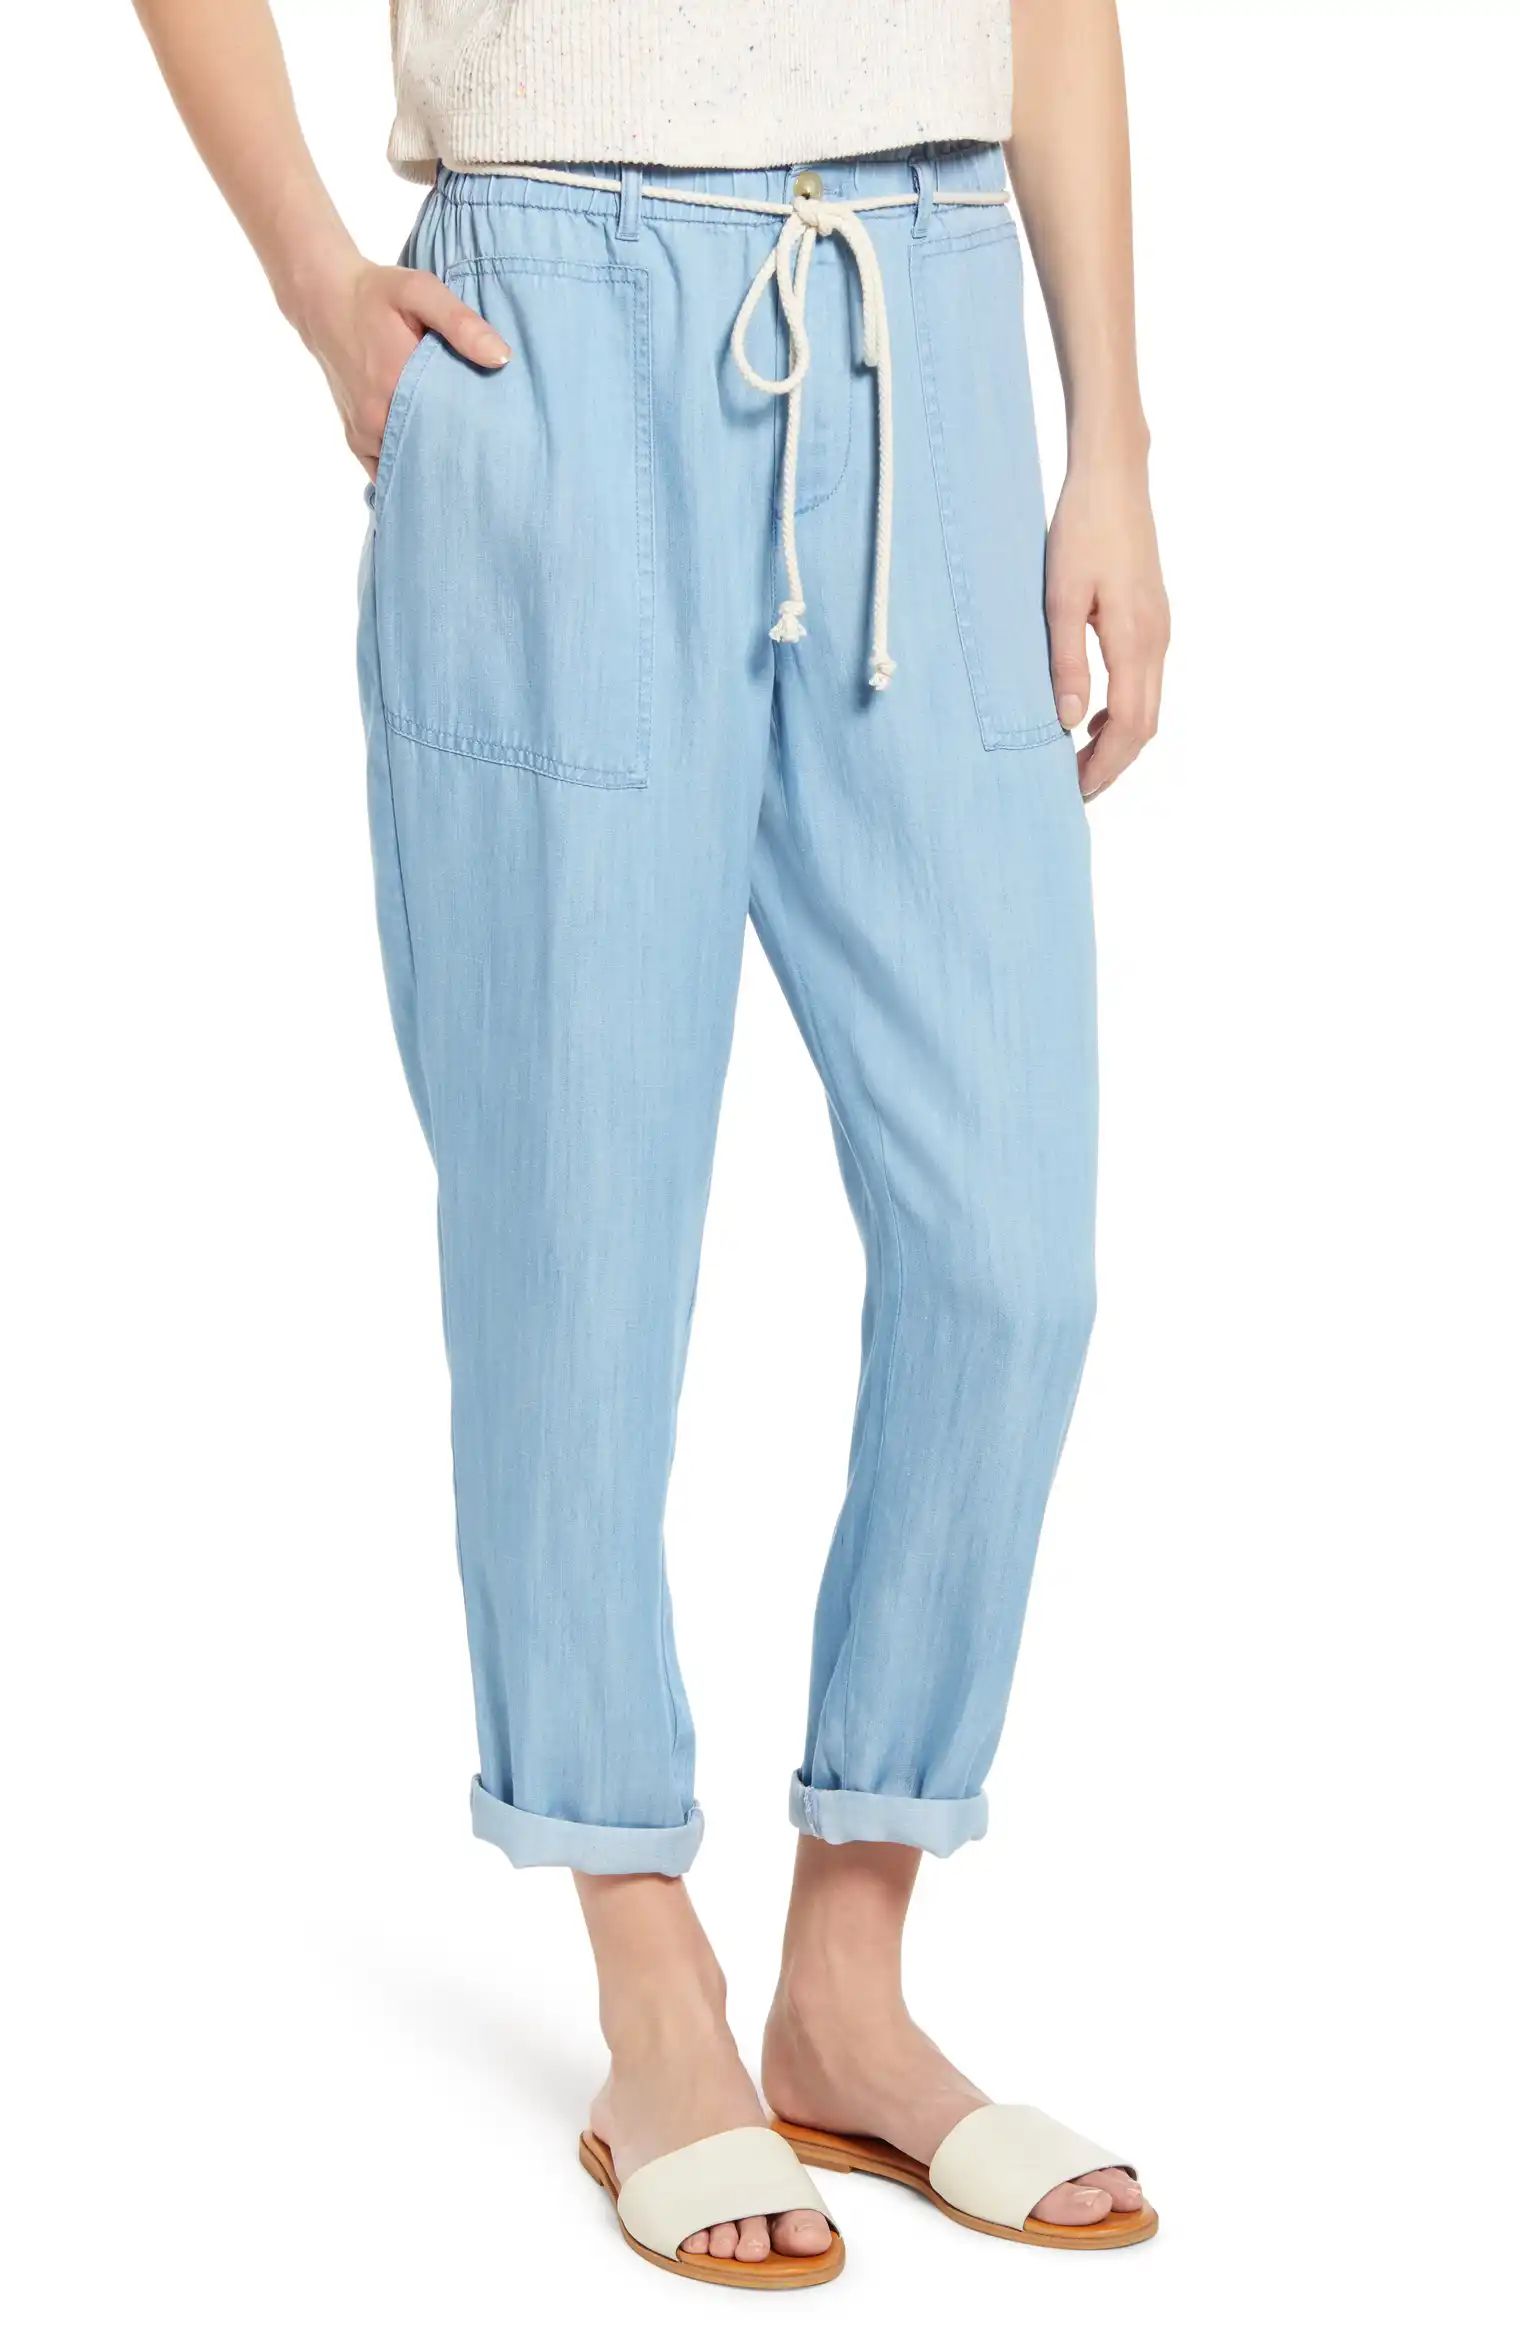 Lou & Grey Chambray Rope-Tie Pants | Nordstrom | Nordstrom